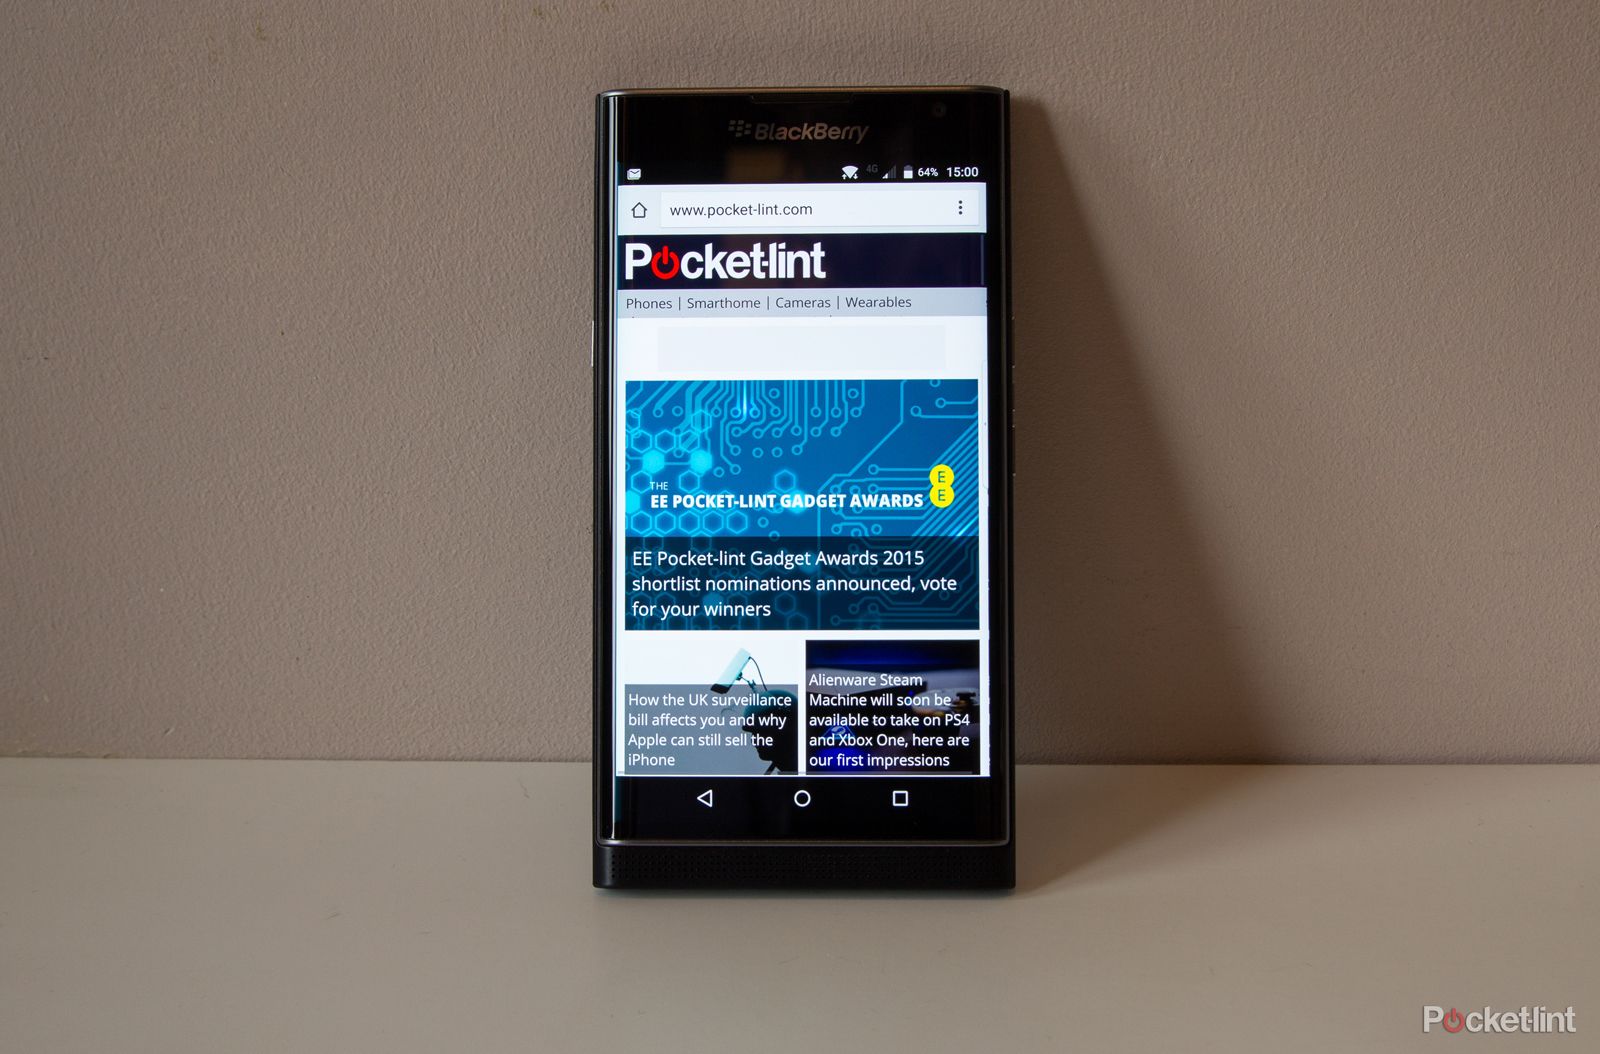 blackberry s first priv software update brings performance camera security enhancements image 1